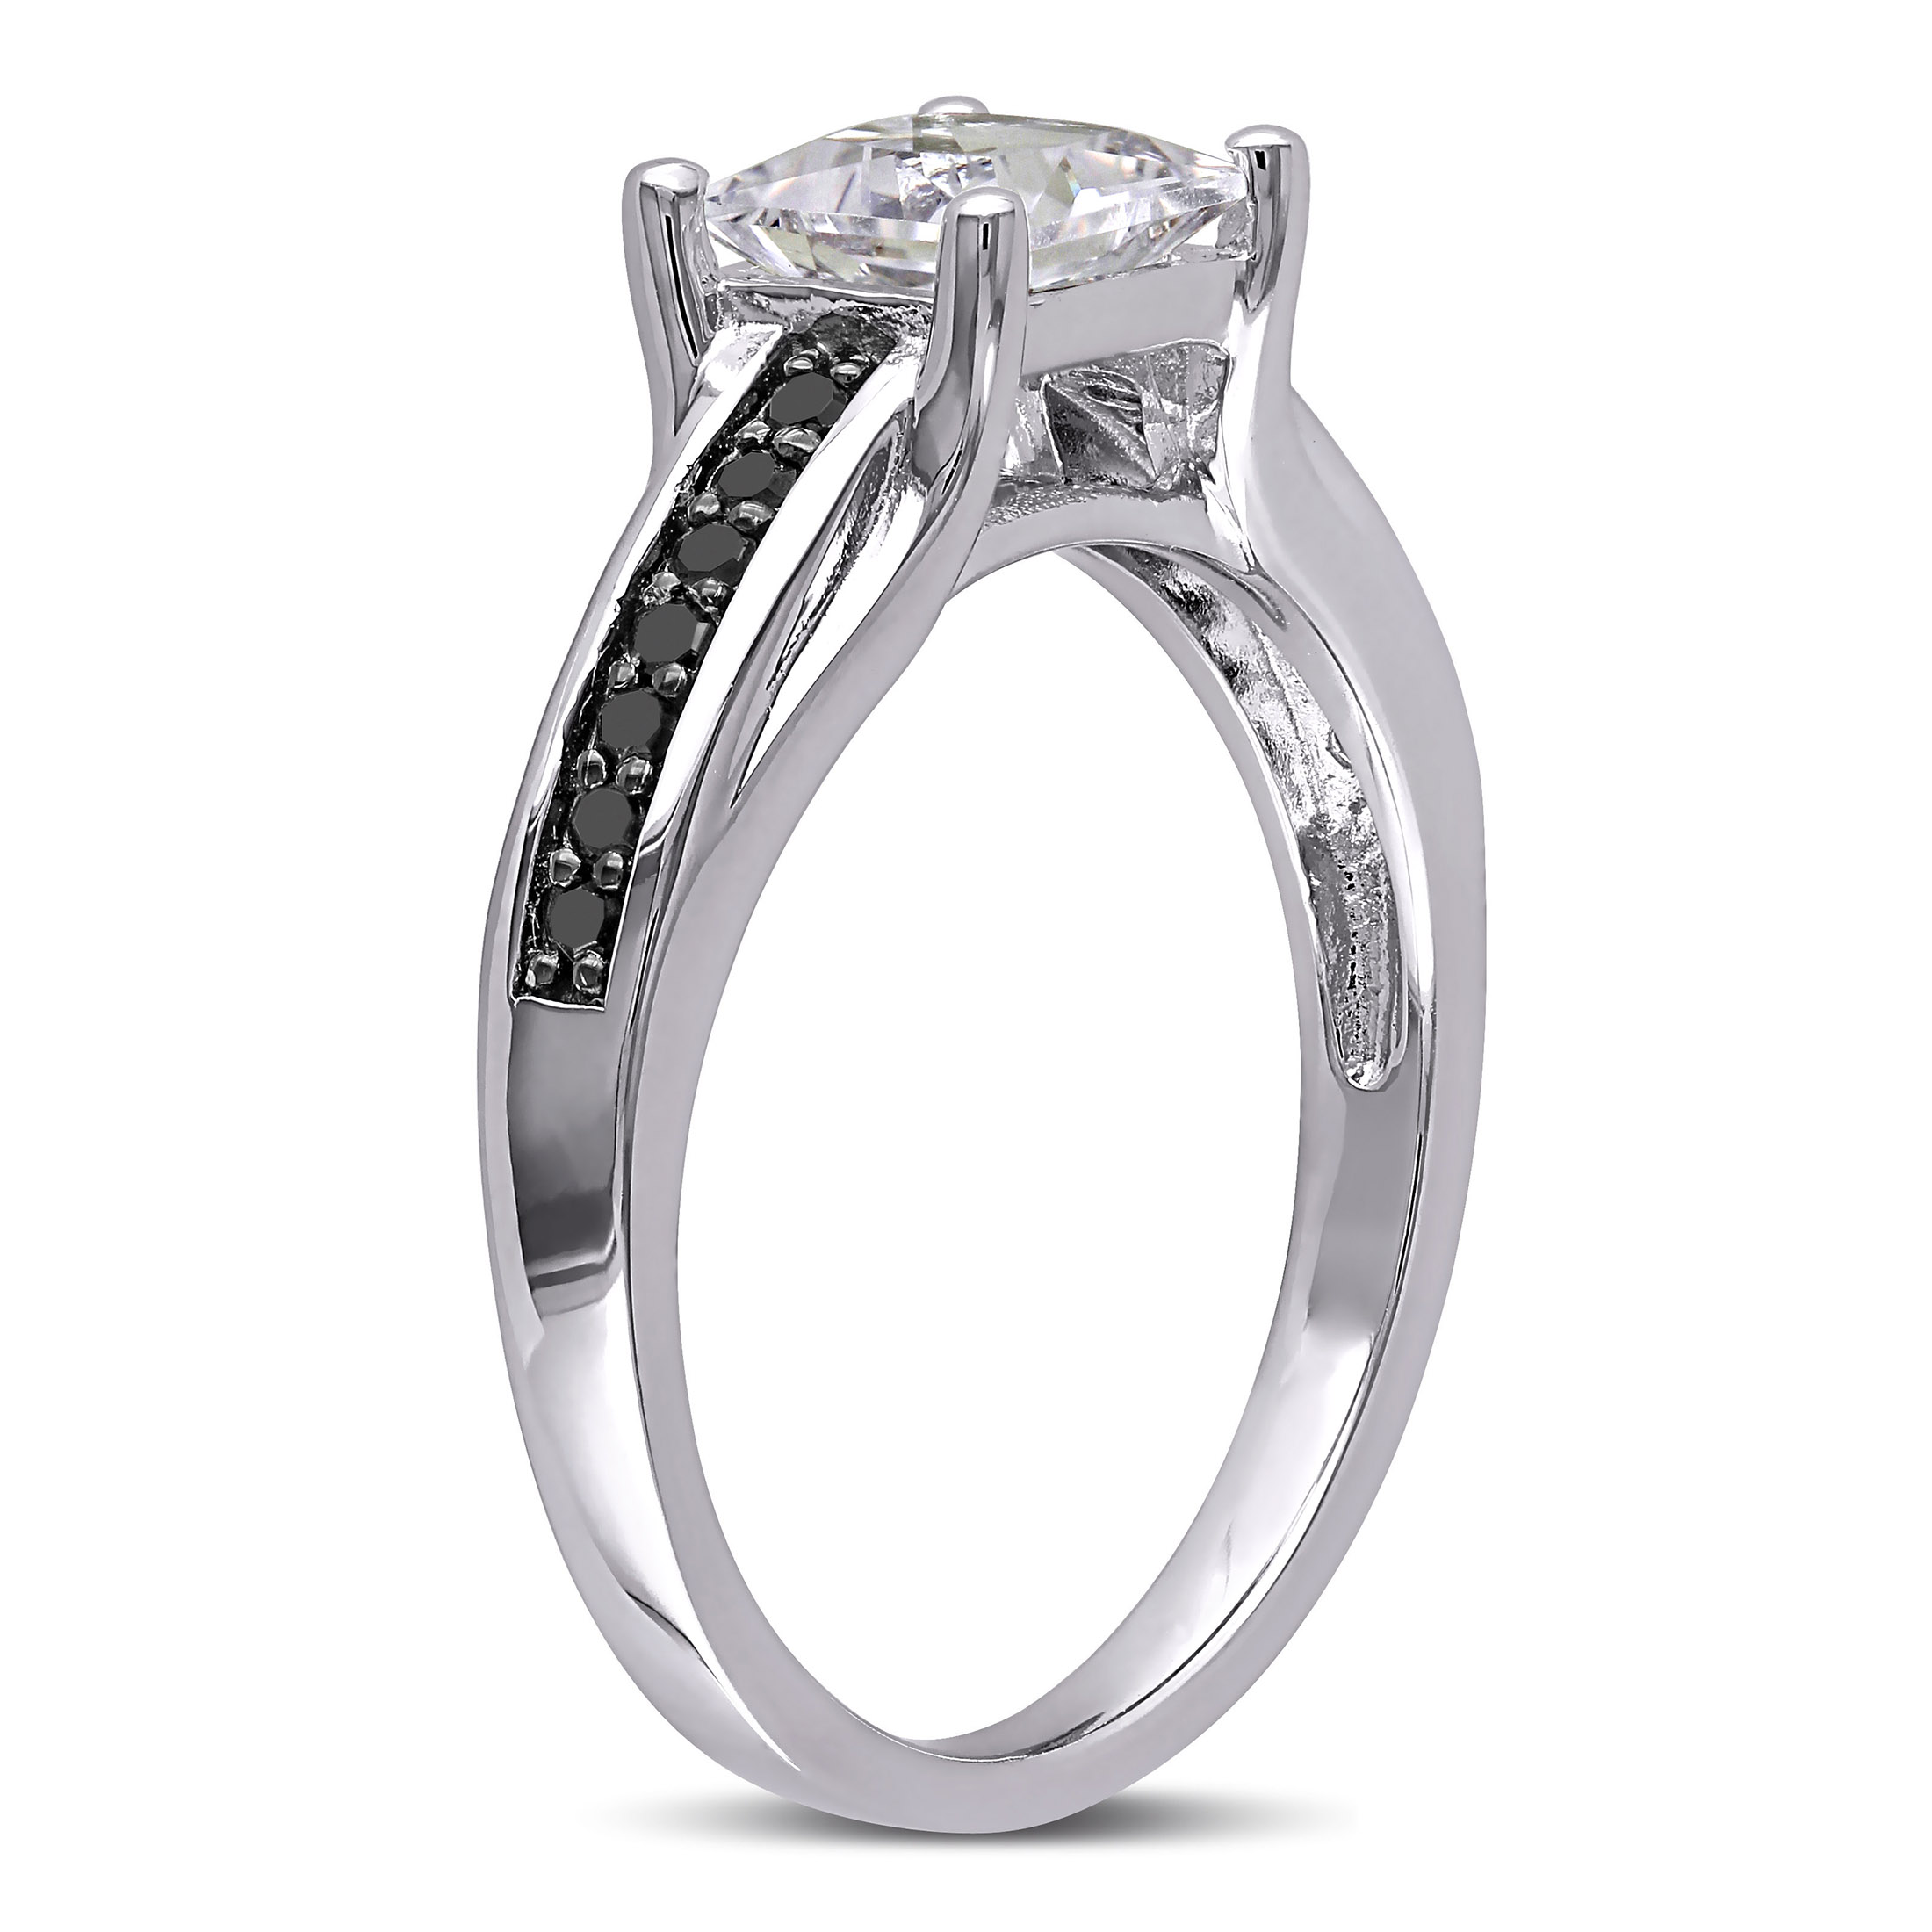 Everly Women's Engagement Anniversary Bridal 1 1/3CT Square-Cut Created White Sapphire 1/7 CT Black Diamond Sterling Silver Solitaire Ring with 4 Prong/Claw/Pave Setting and Diamonds on Band - image 4 of 7